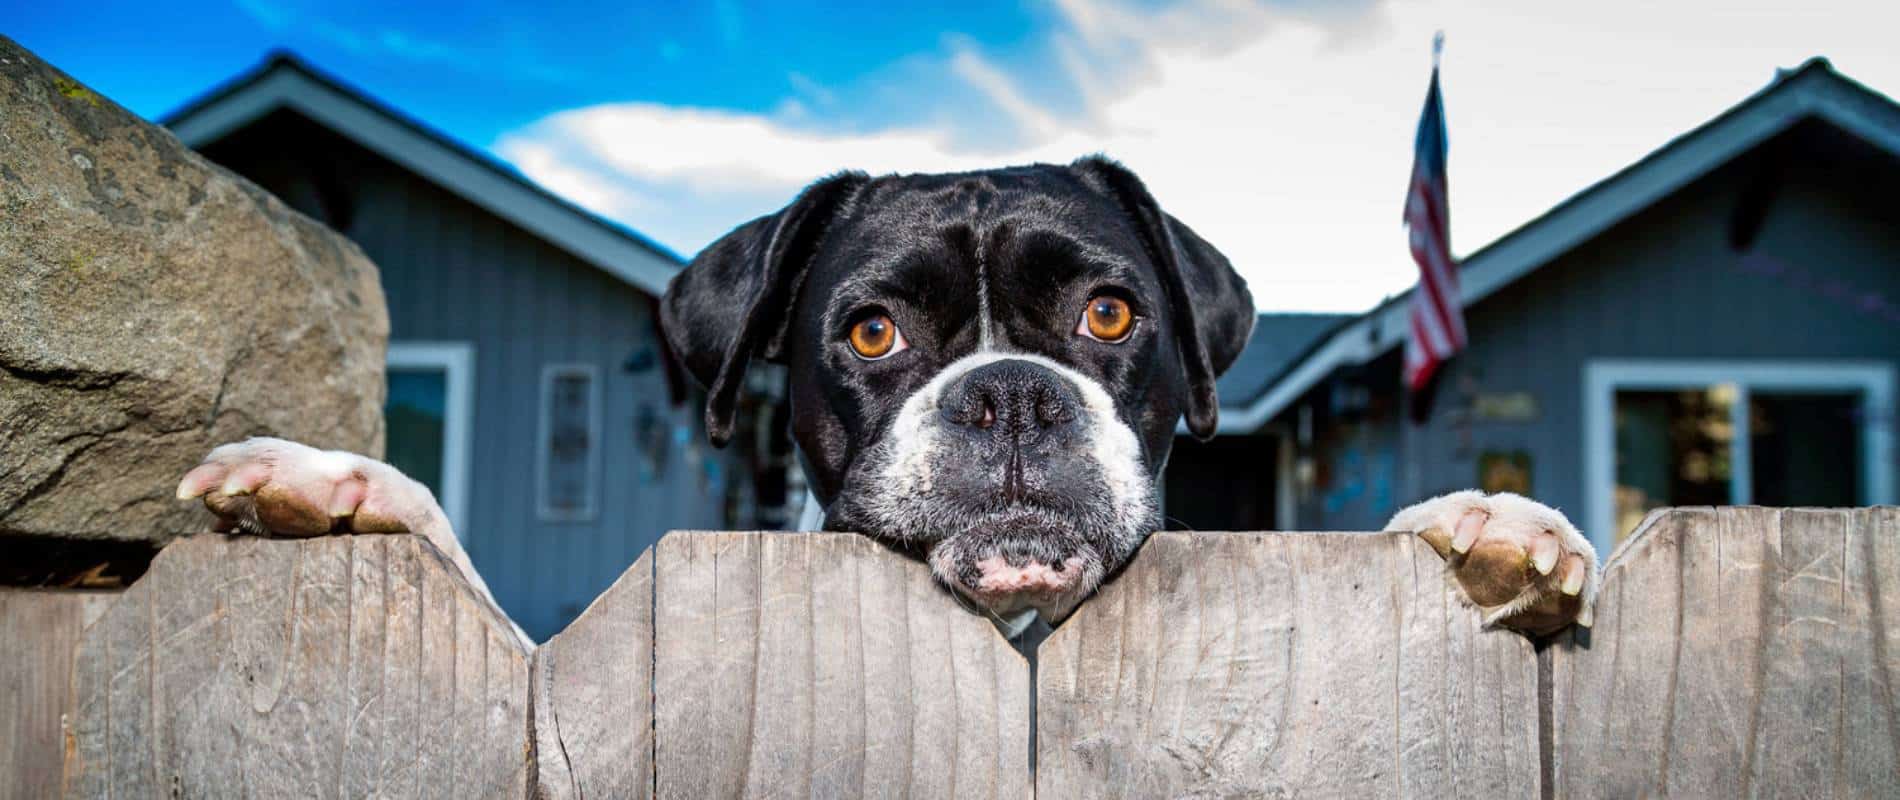 dog with paws on fence looking over